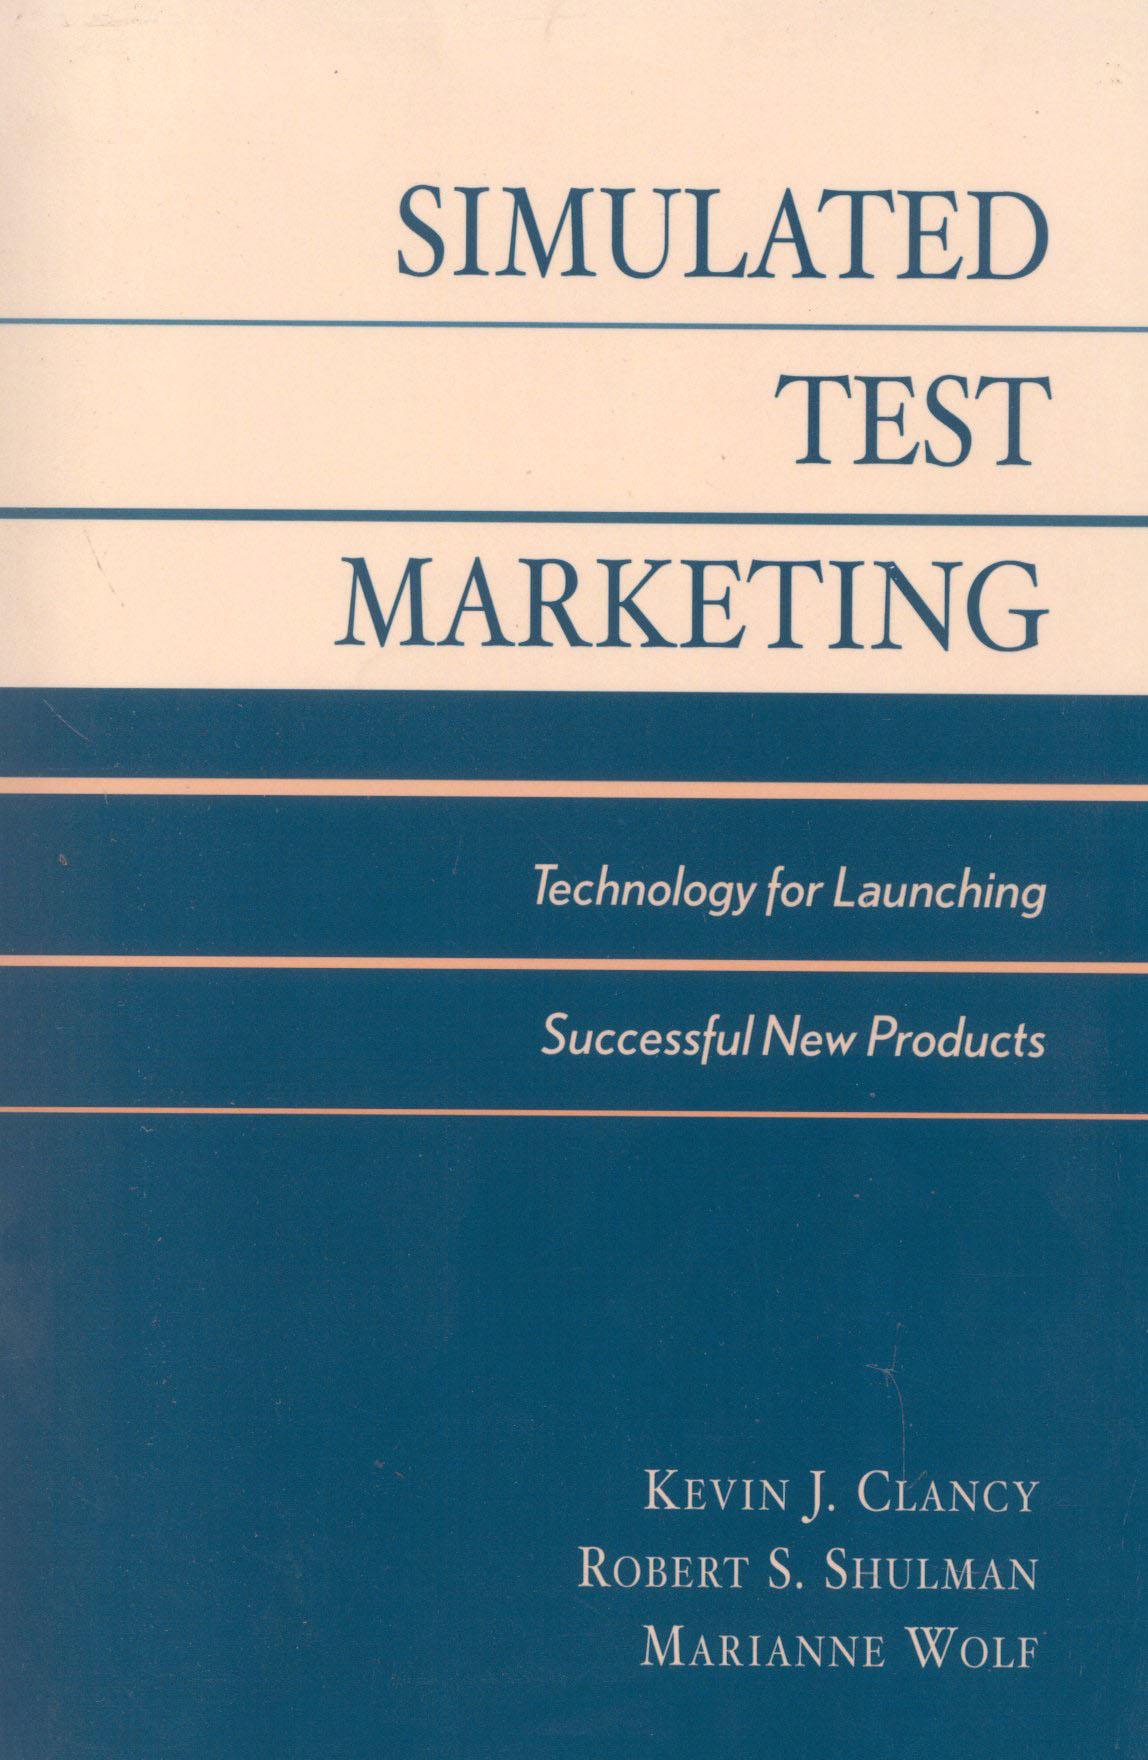 Market New Products Successfully: Using Simulated Test Market Technology